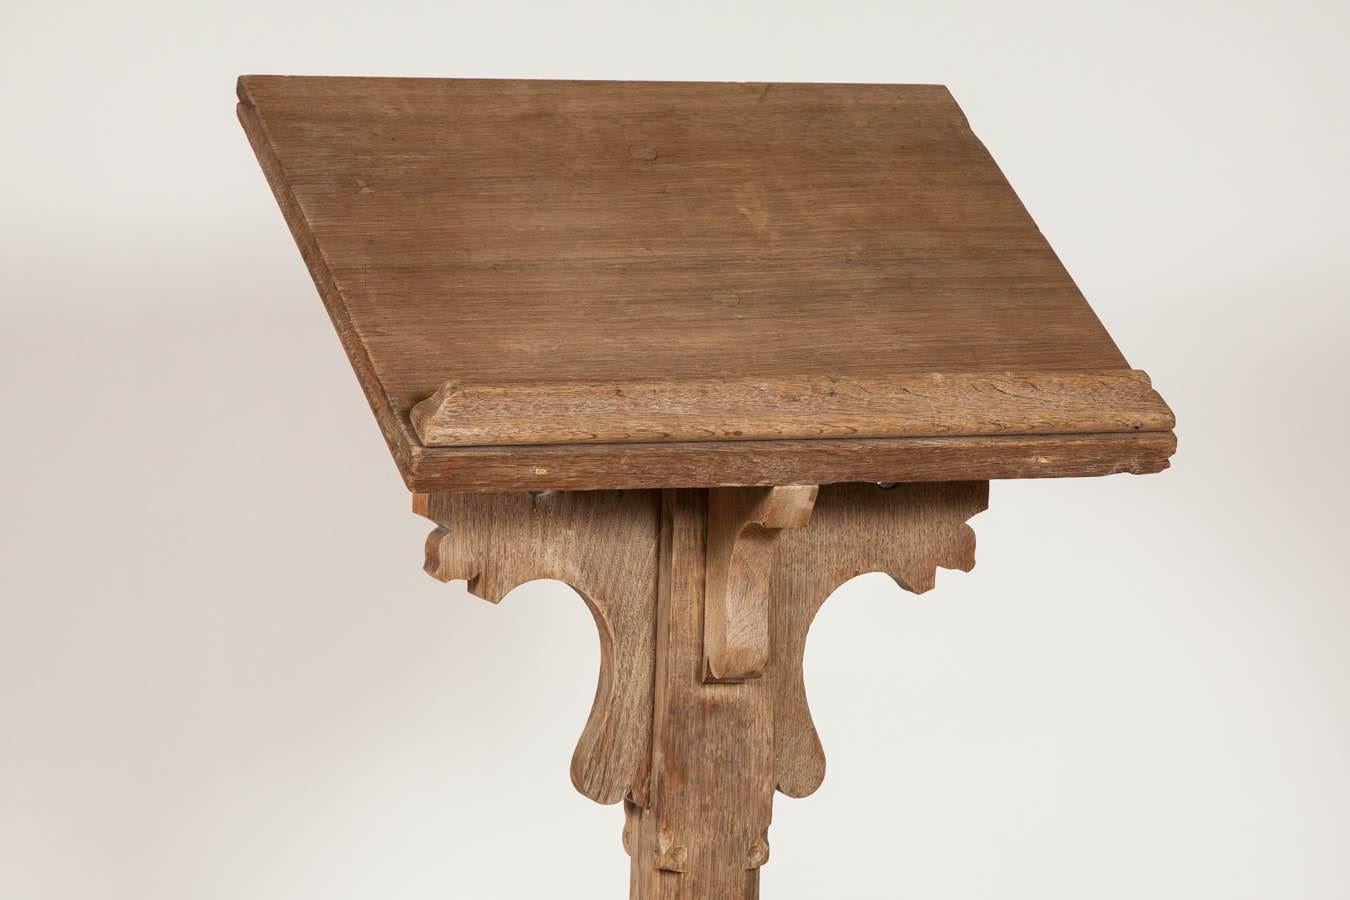 A tall antique lectern in solid oak. This original late 19th century lectern is in a Gothic Revival design with quatrefoil motifs carved on the supports.